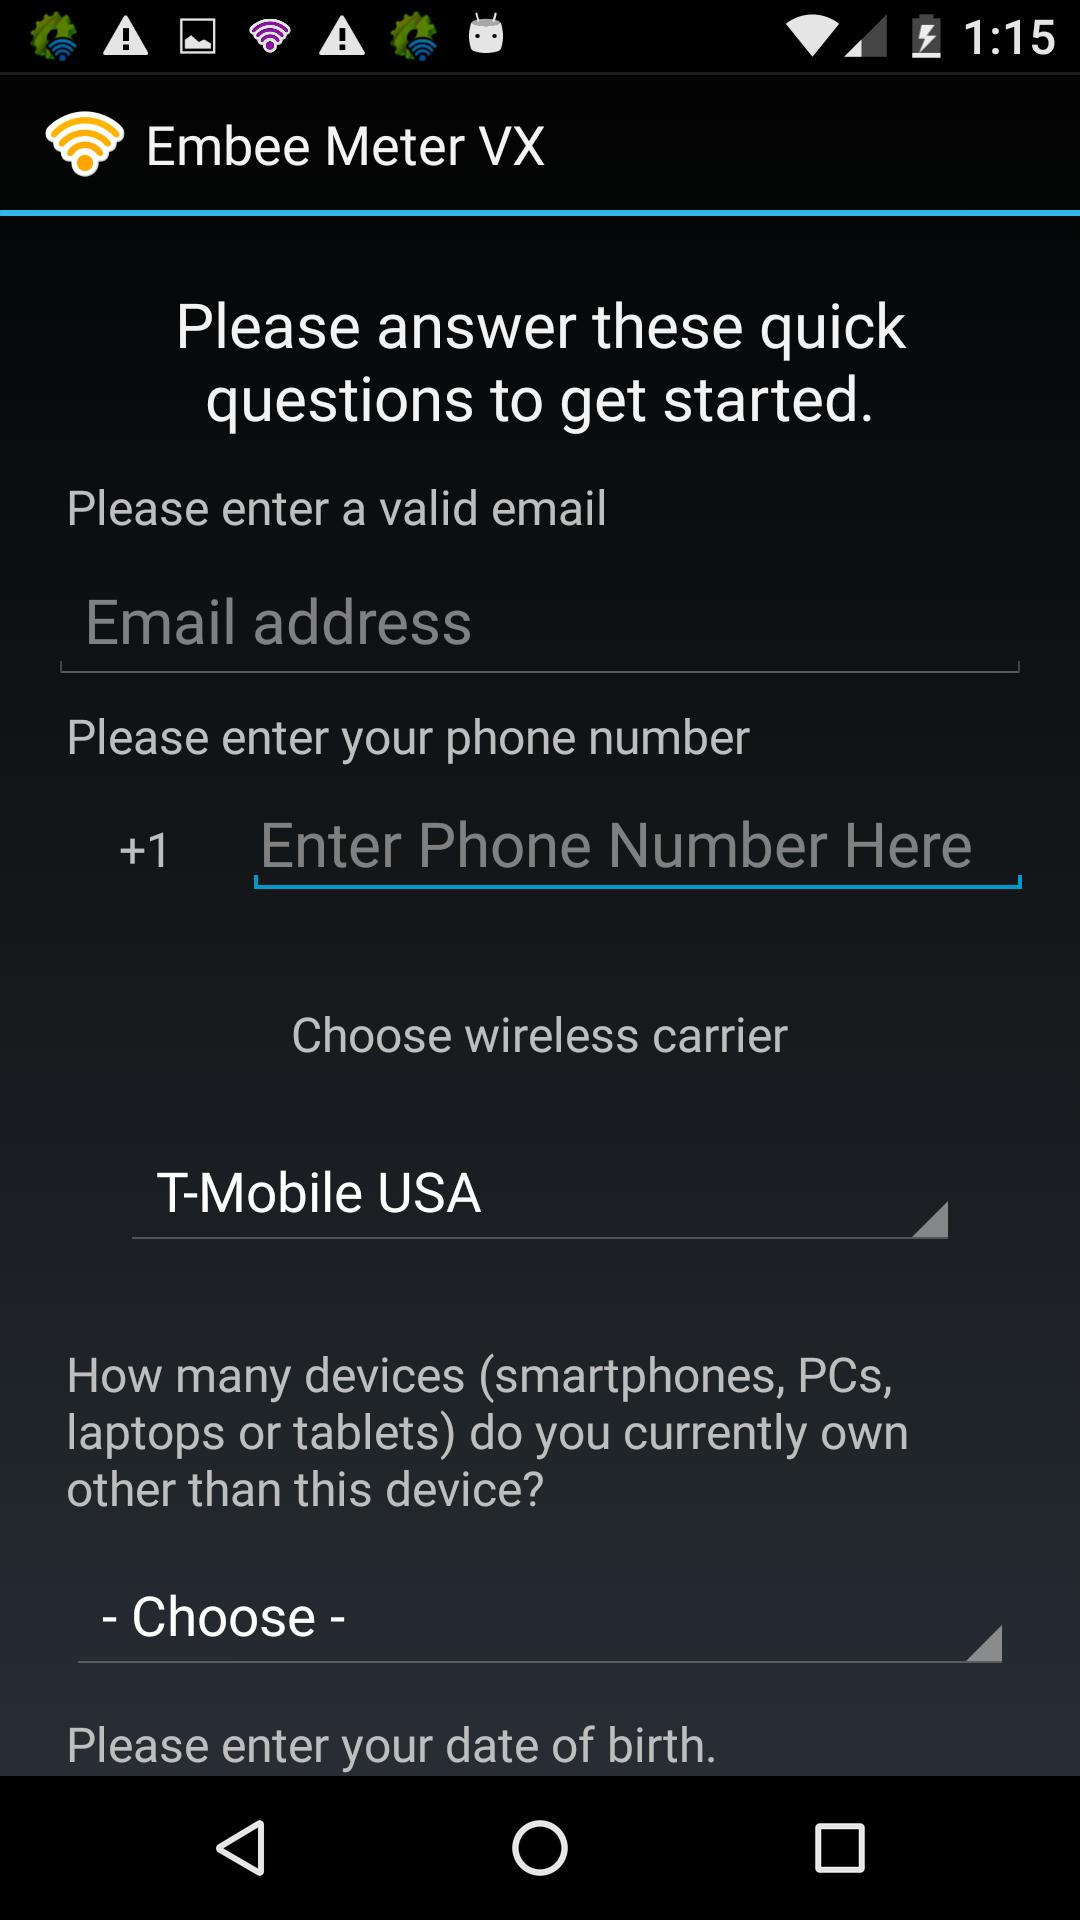 Embee Meter VX for Android - APK Download